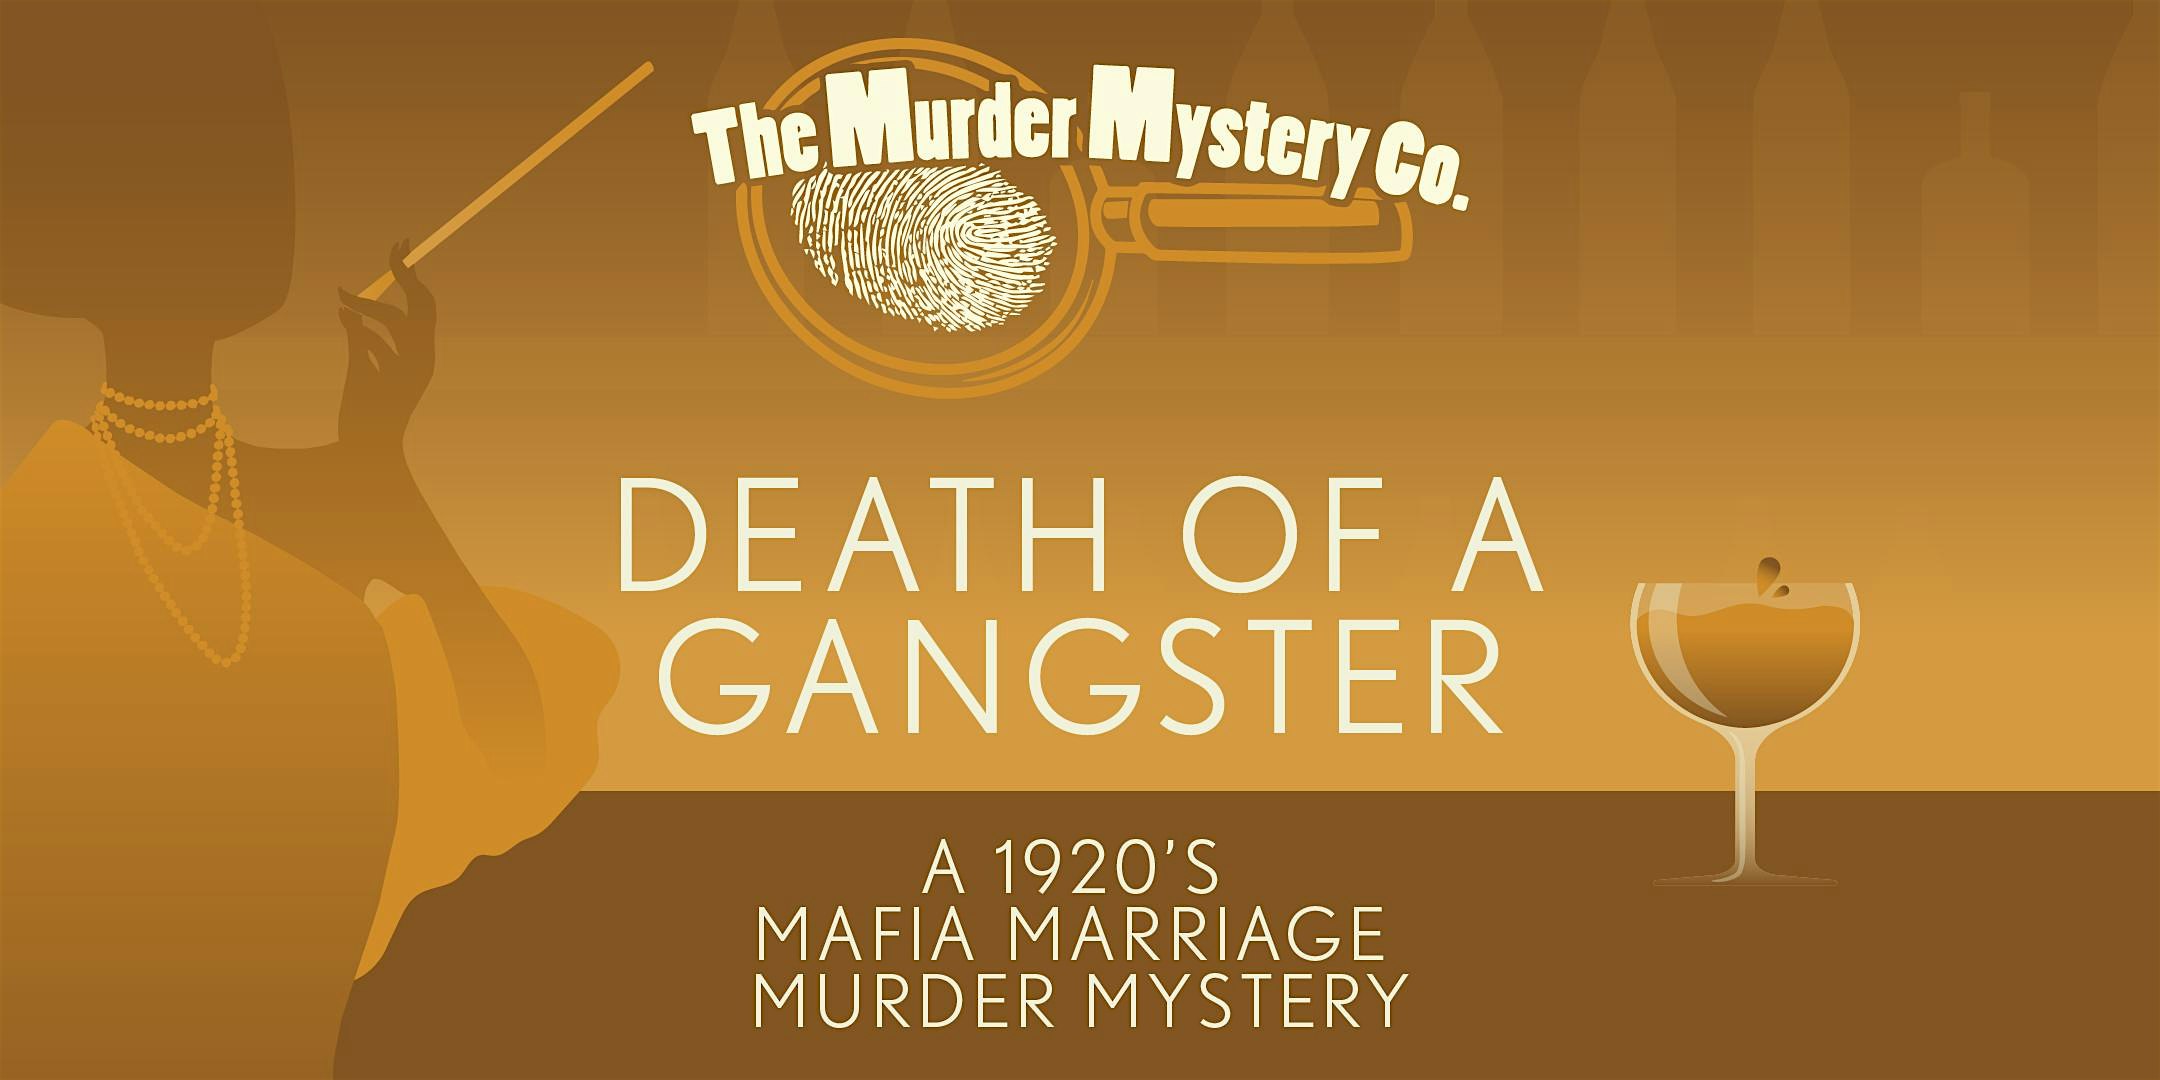 Murder Mystery Dinner Theatre Show in Baltimore: Death of a Gangster